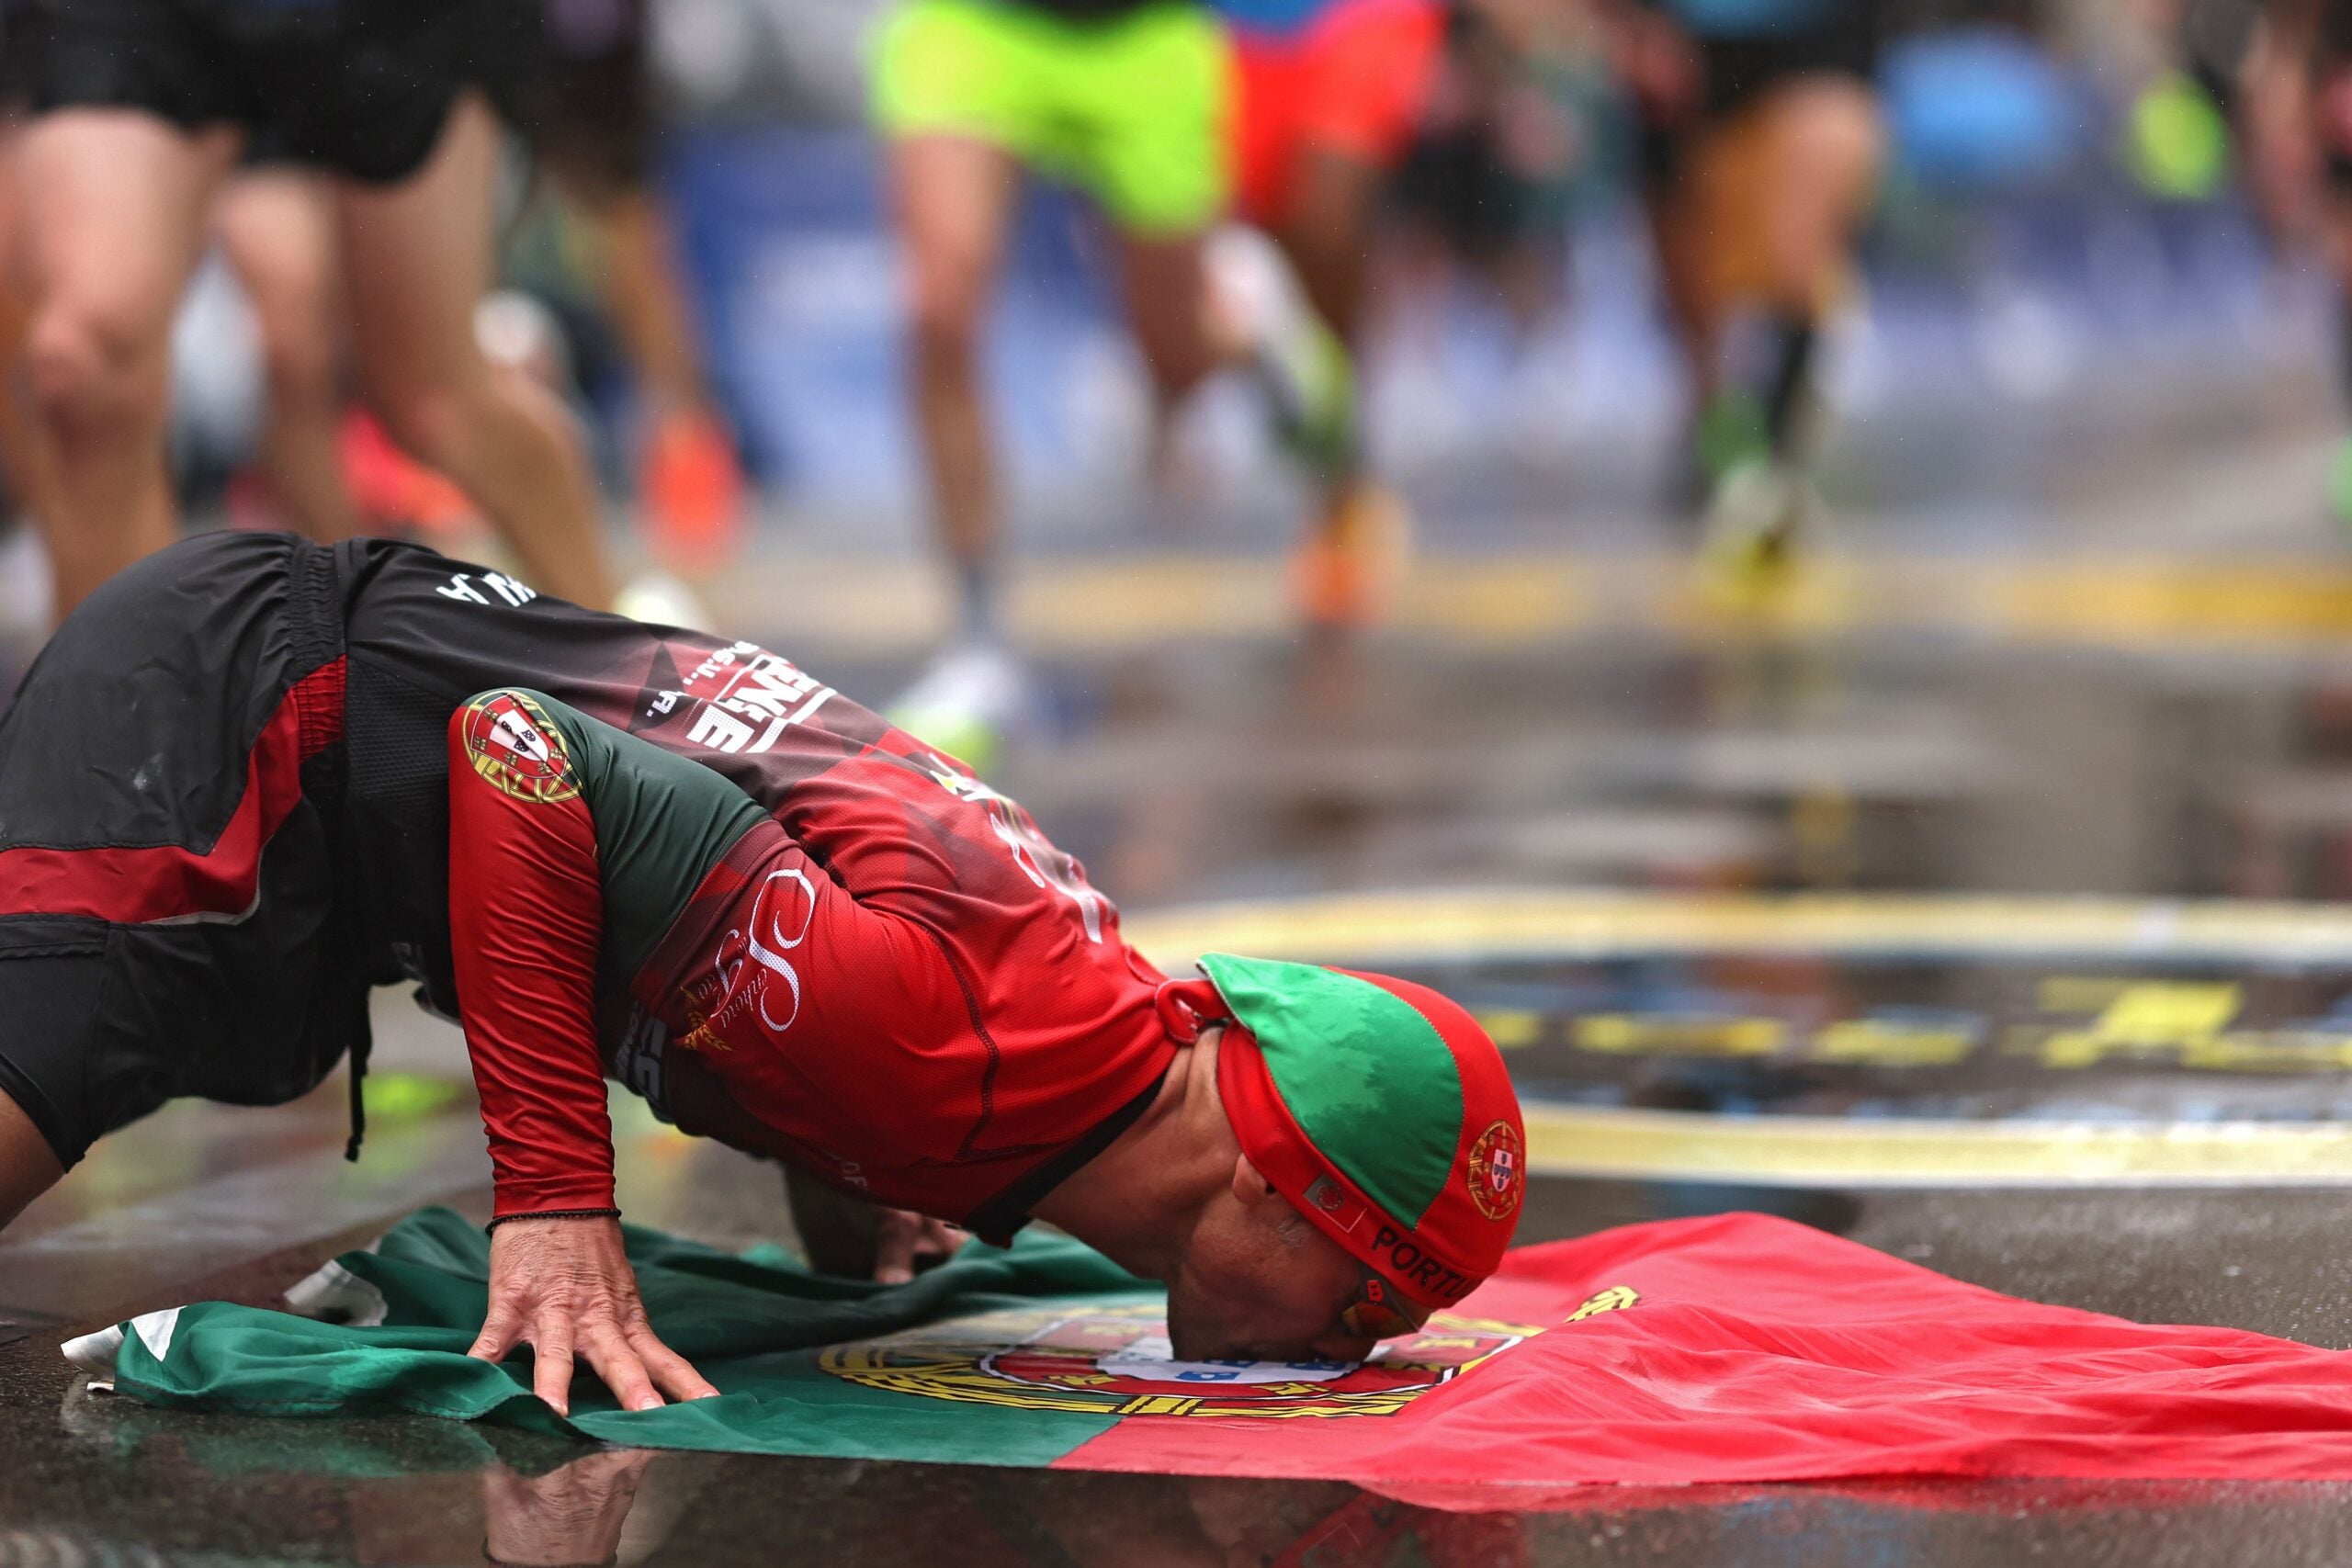 Manuel Cabral celebrates after crossing the finish line during the 127th Boston Marathon on April 17, 2023 in Boston, Massachusetts.